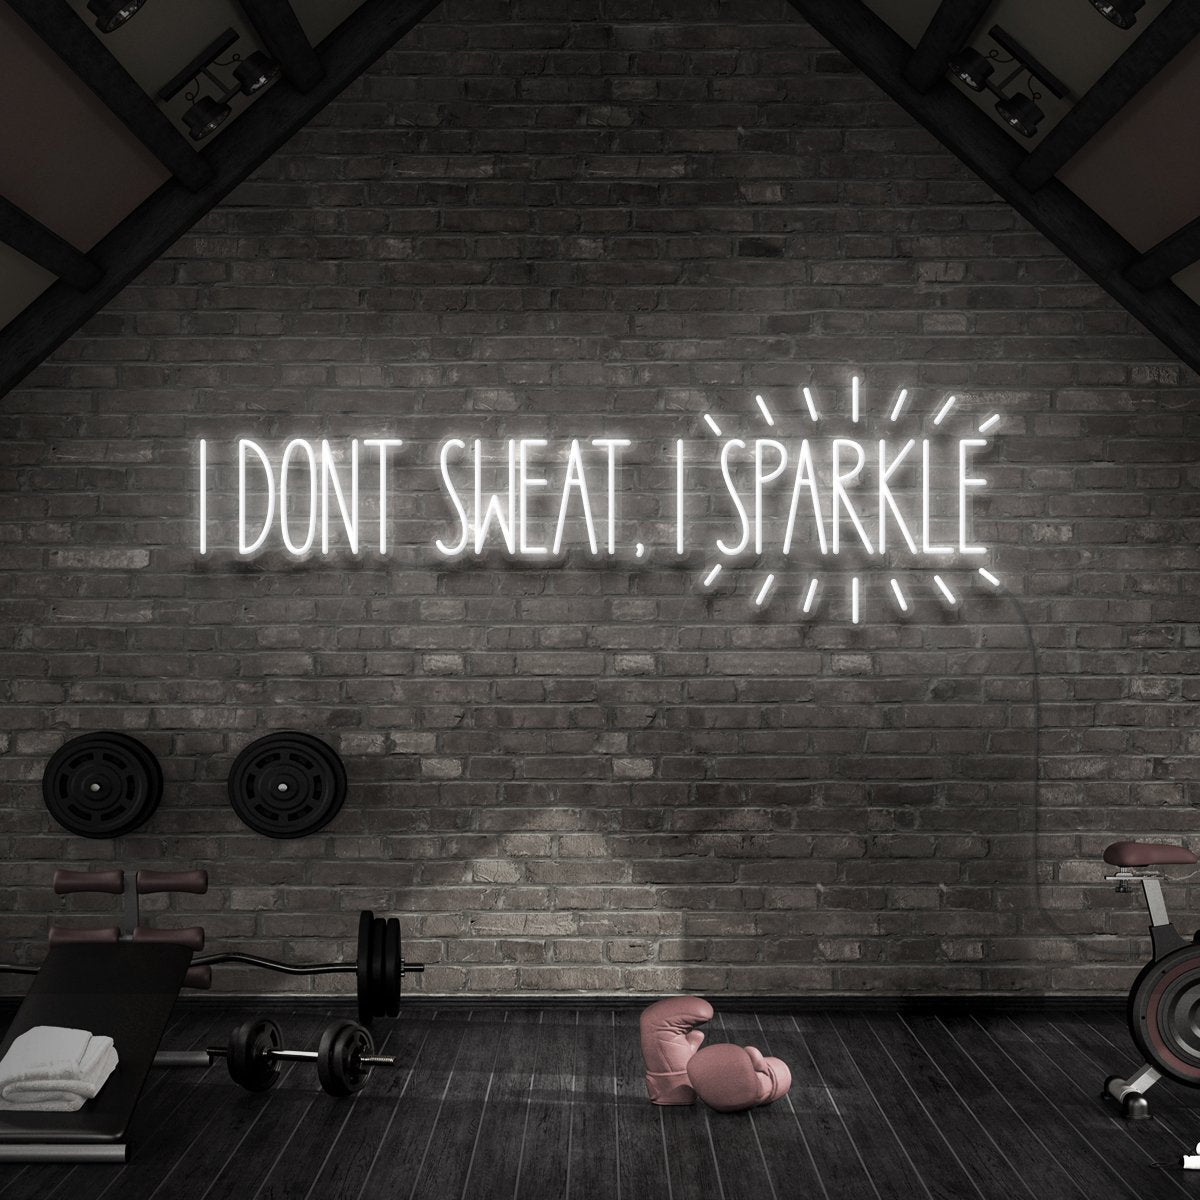 "I Don't Sweat, I Sparkle" Neon Sign for Gyms & Fitness Studios